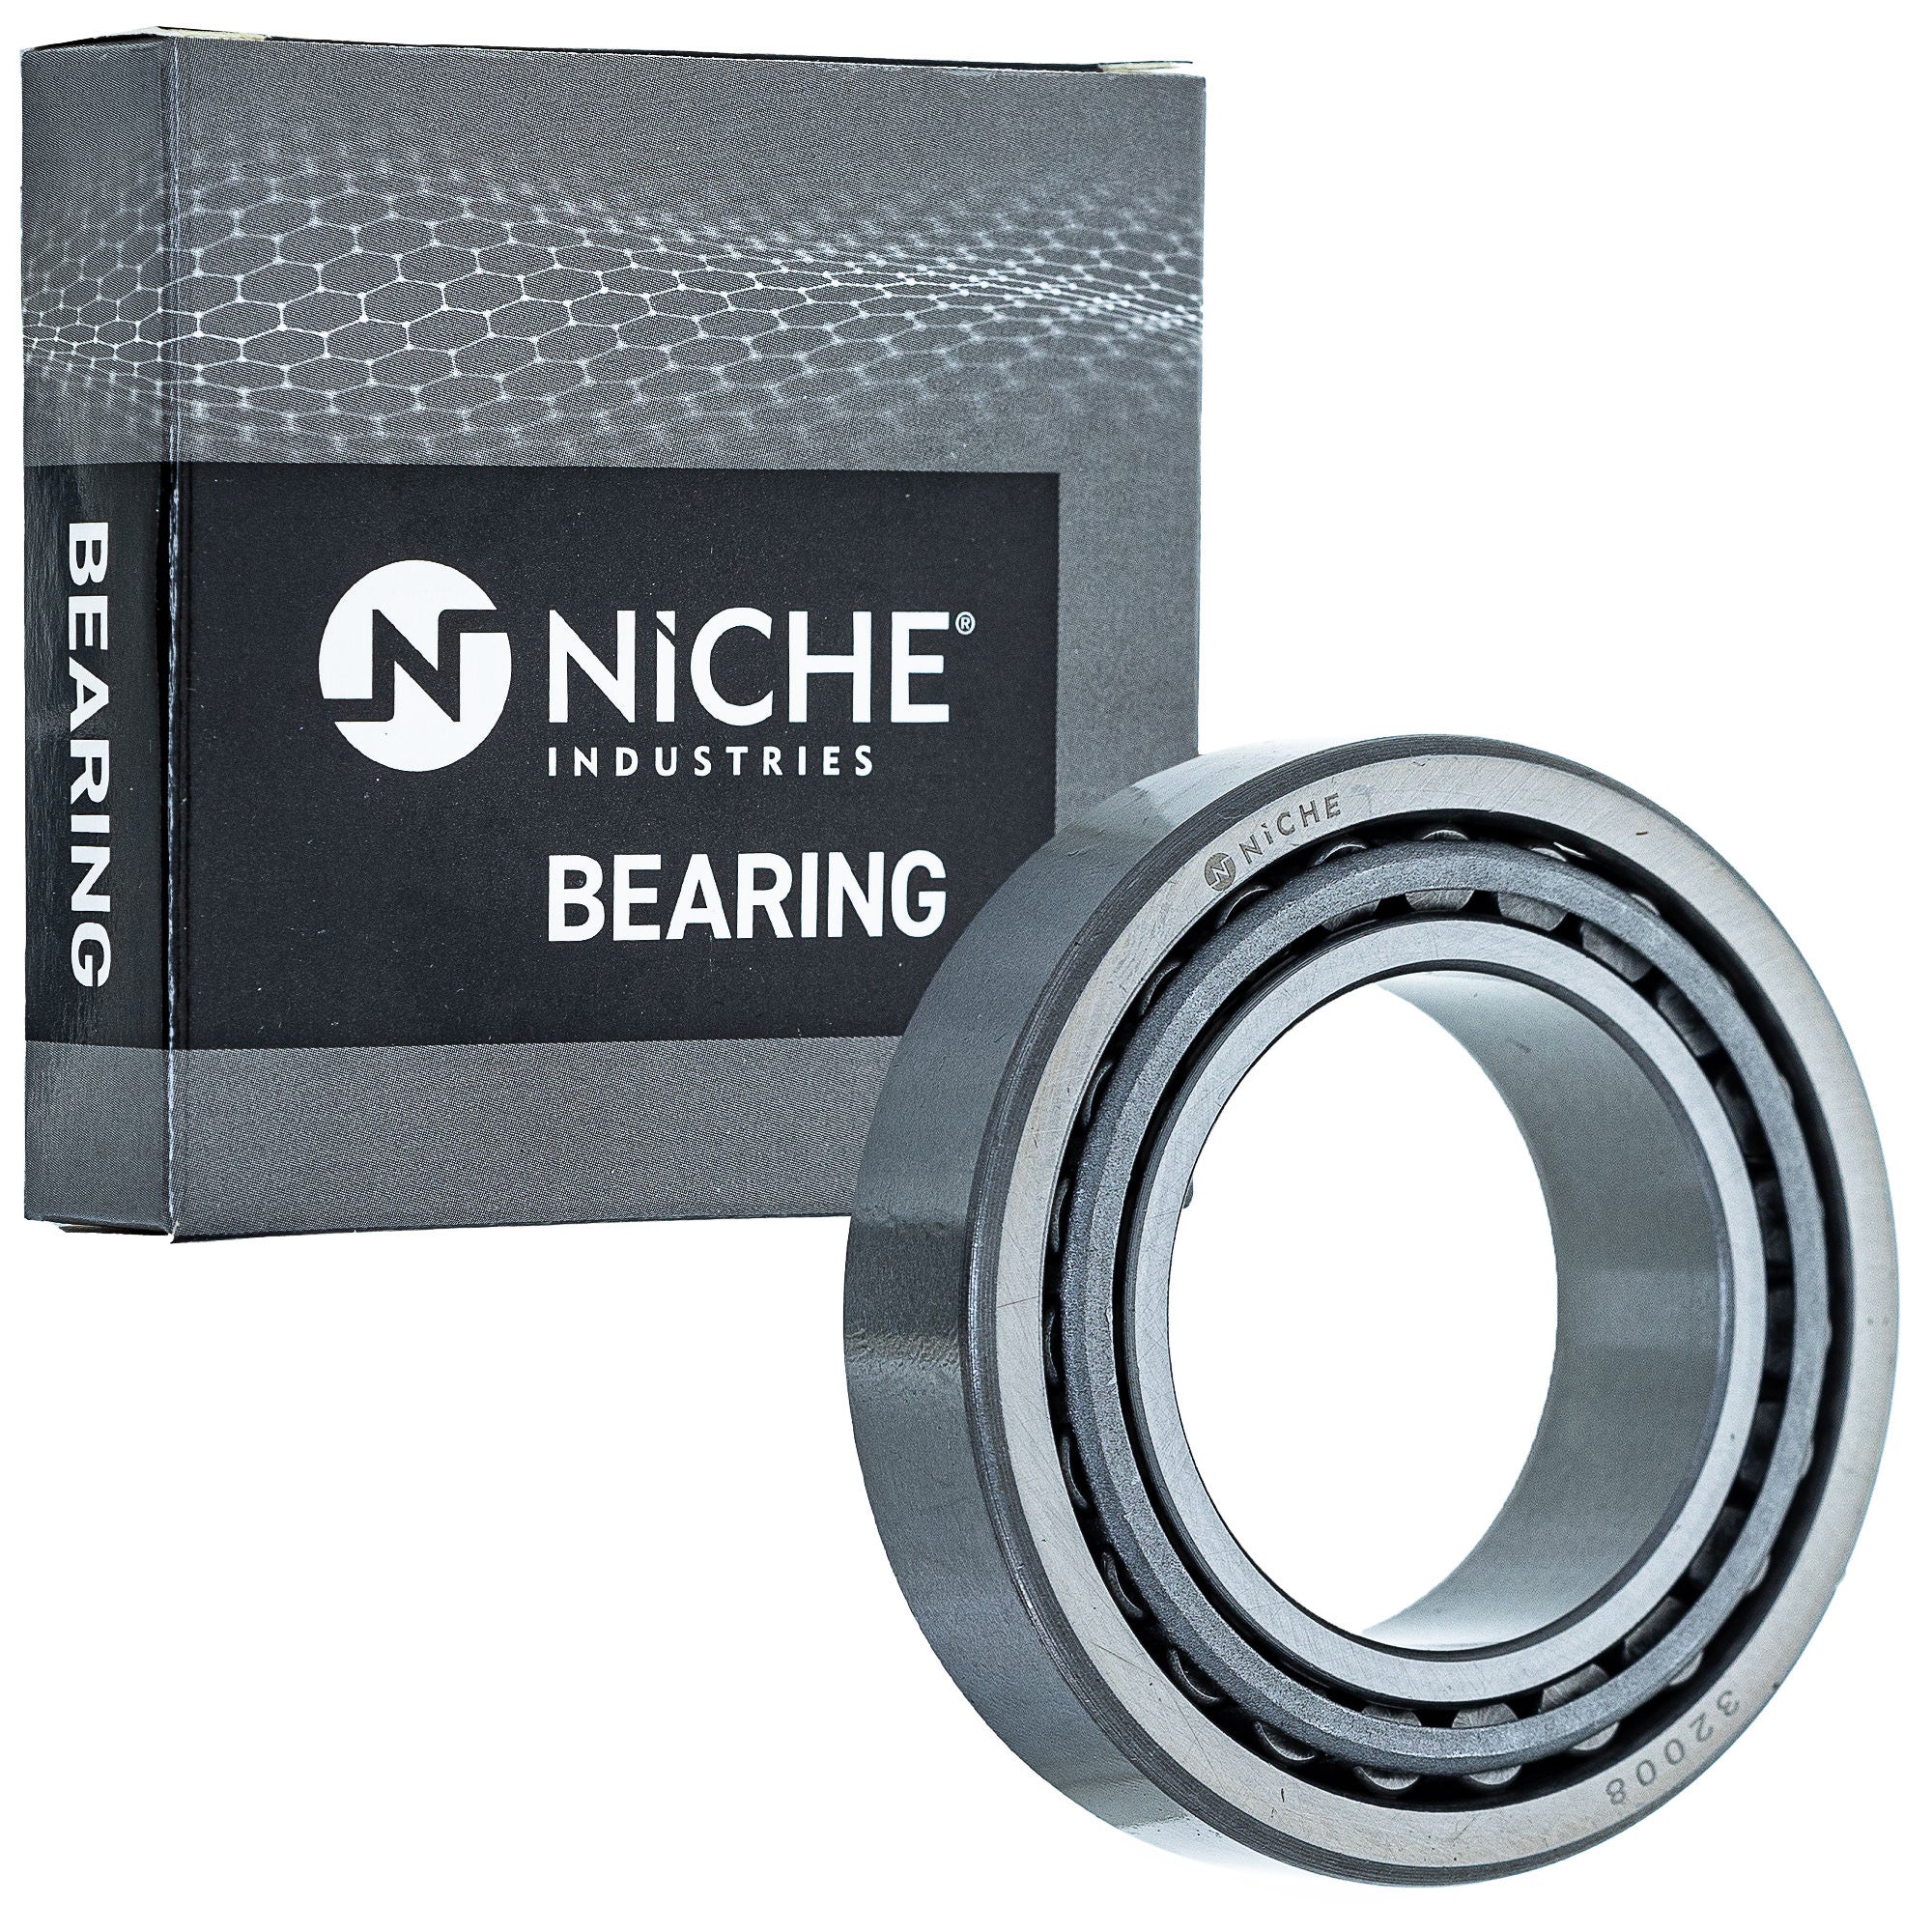 NICHE 519-CBB2296R Bearing 10-Pack for zOTHER Predator Outlaw Grand